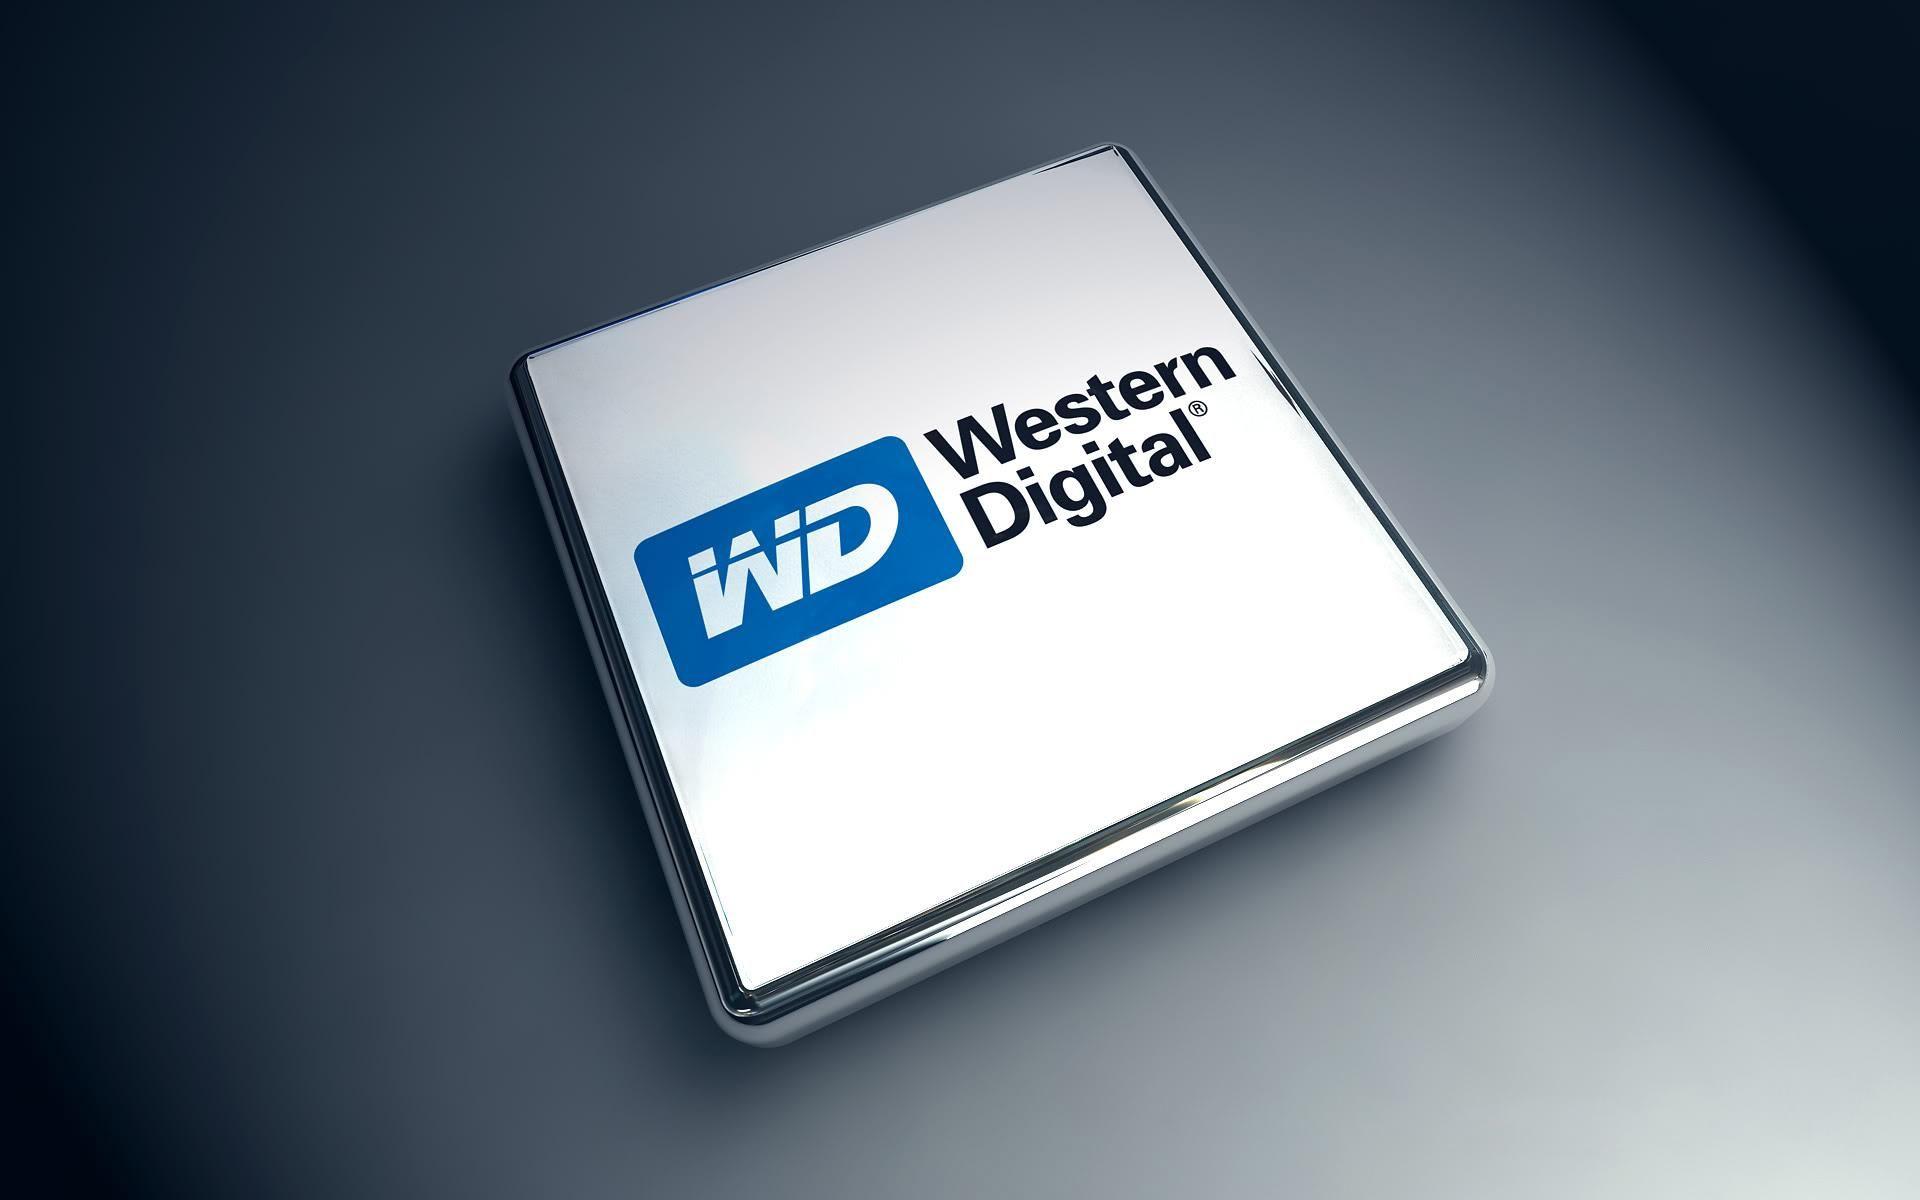 Western Digital Corporation Logo - Why Western Digital Corporation Stock Plunged After Earnings ...